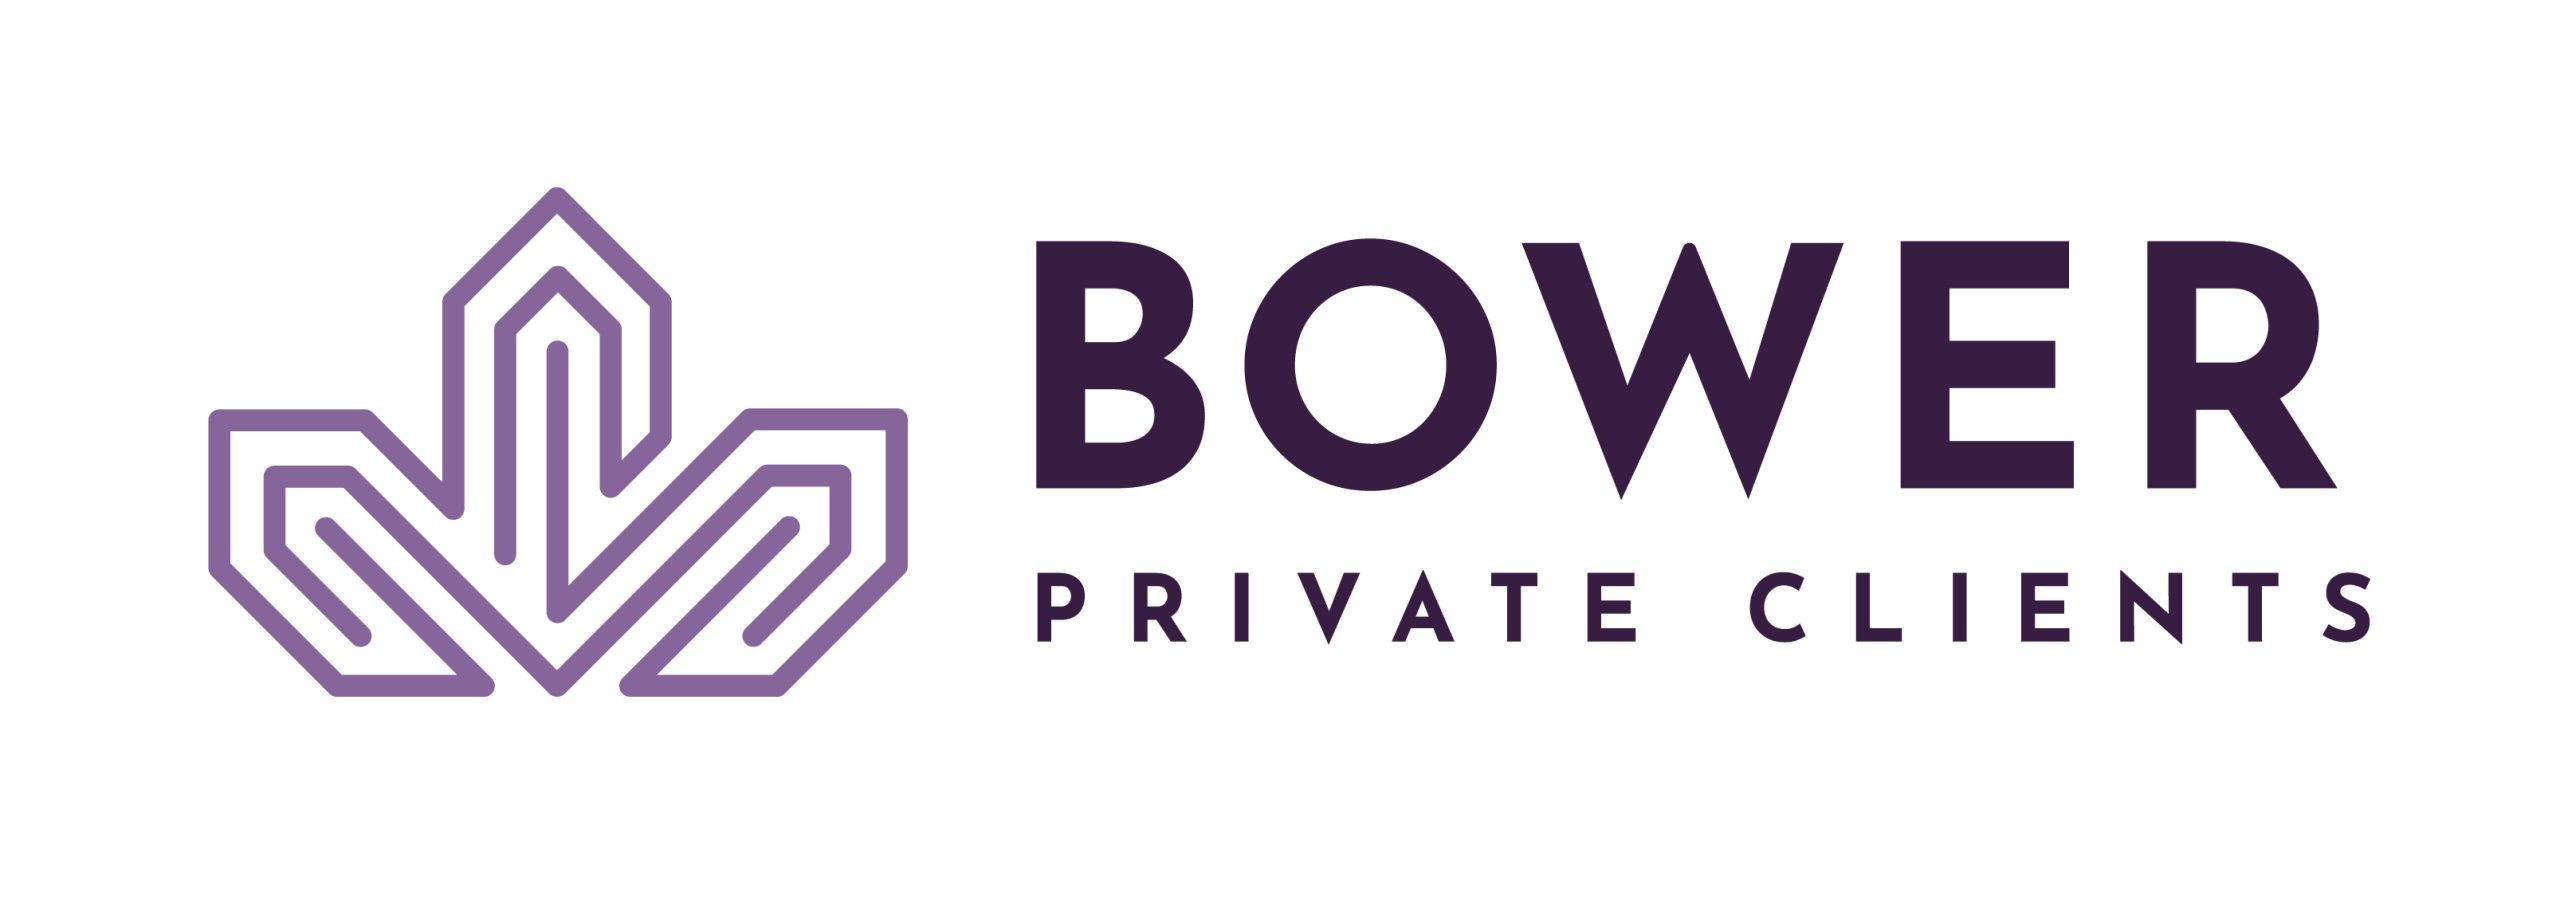 Bower Private Clients brand logo